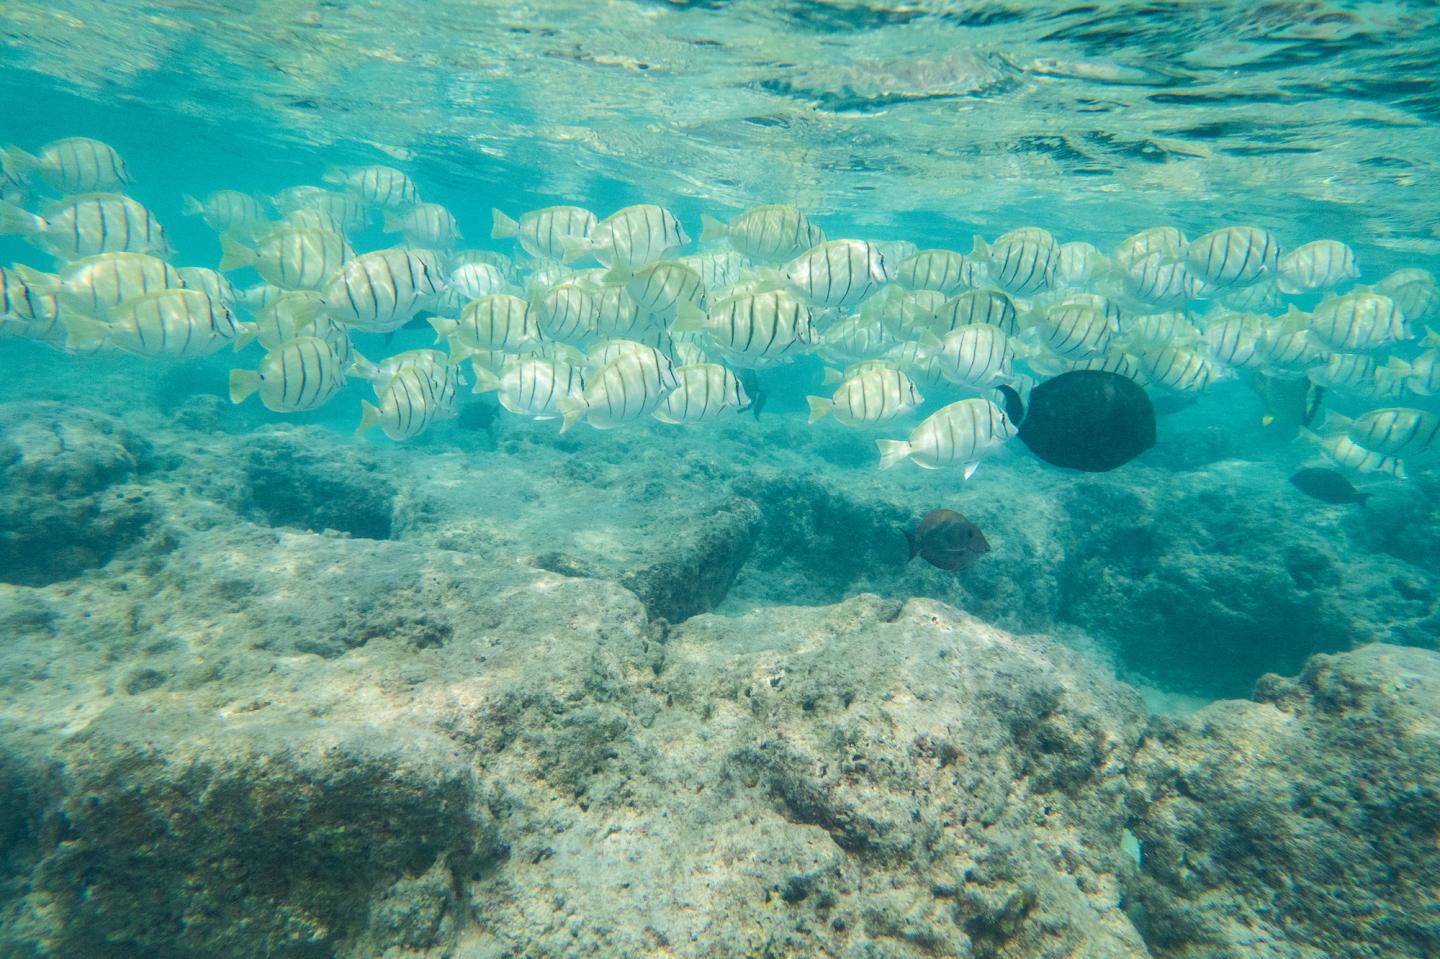 Schooling fishes